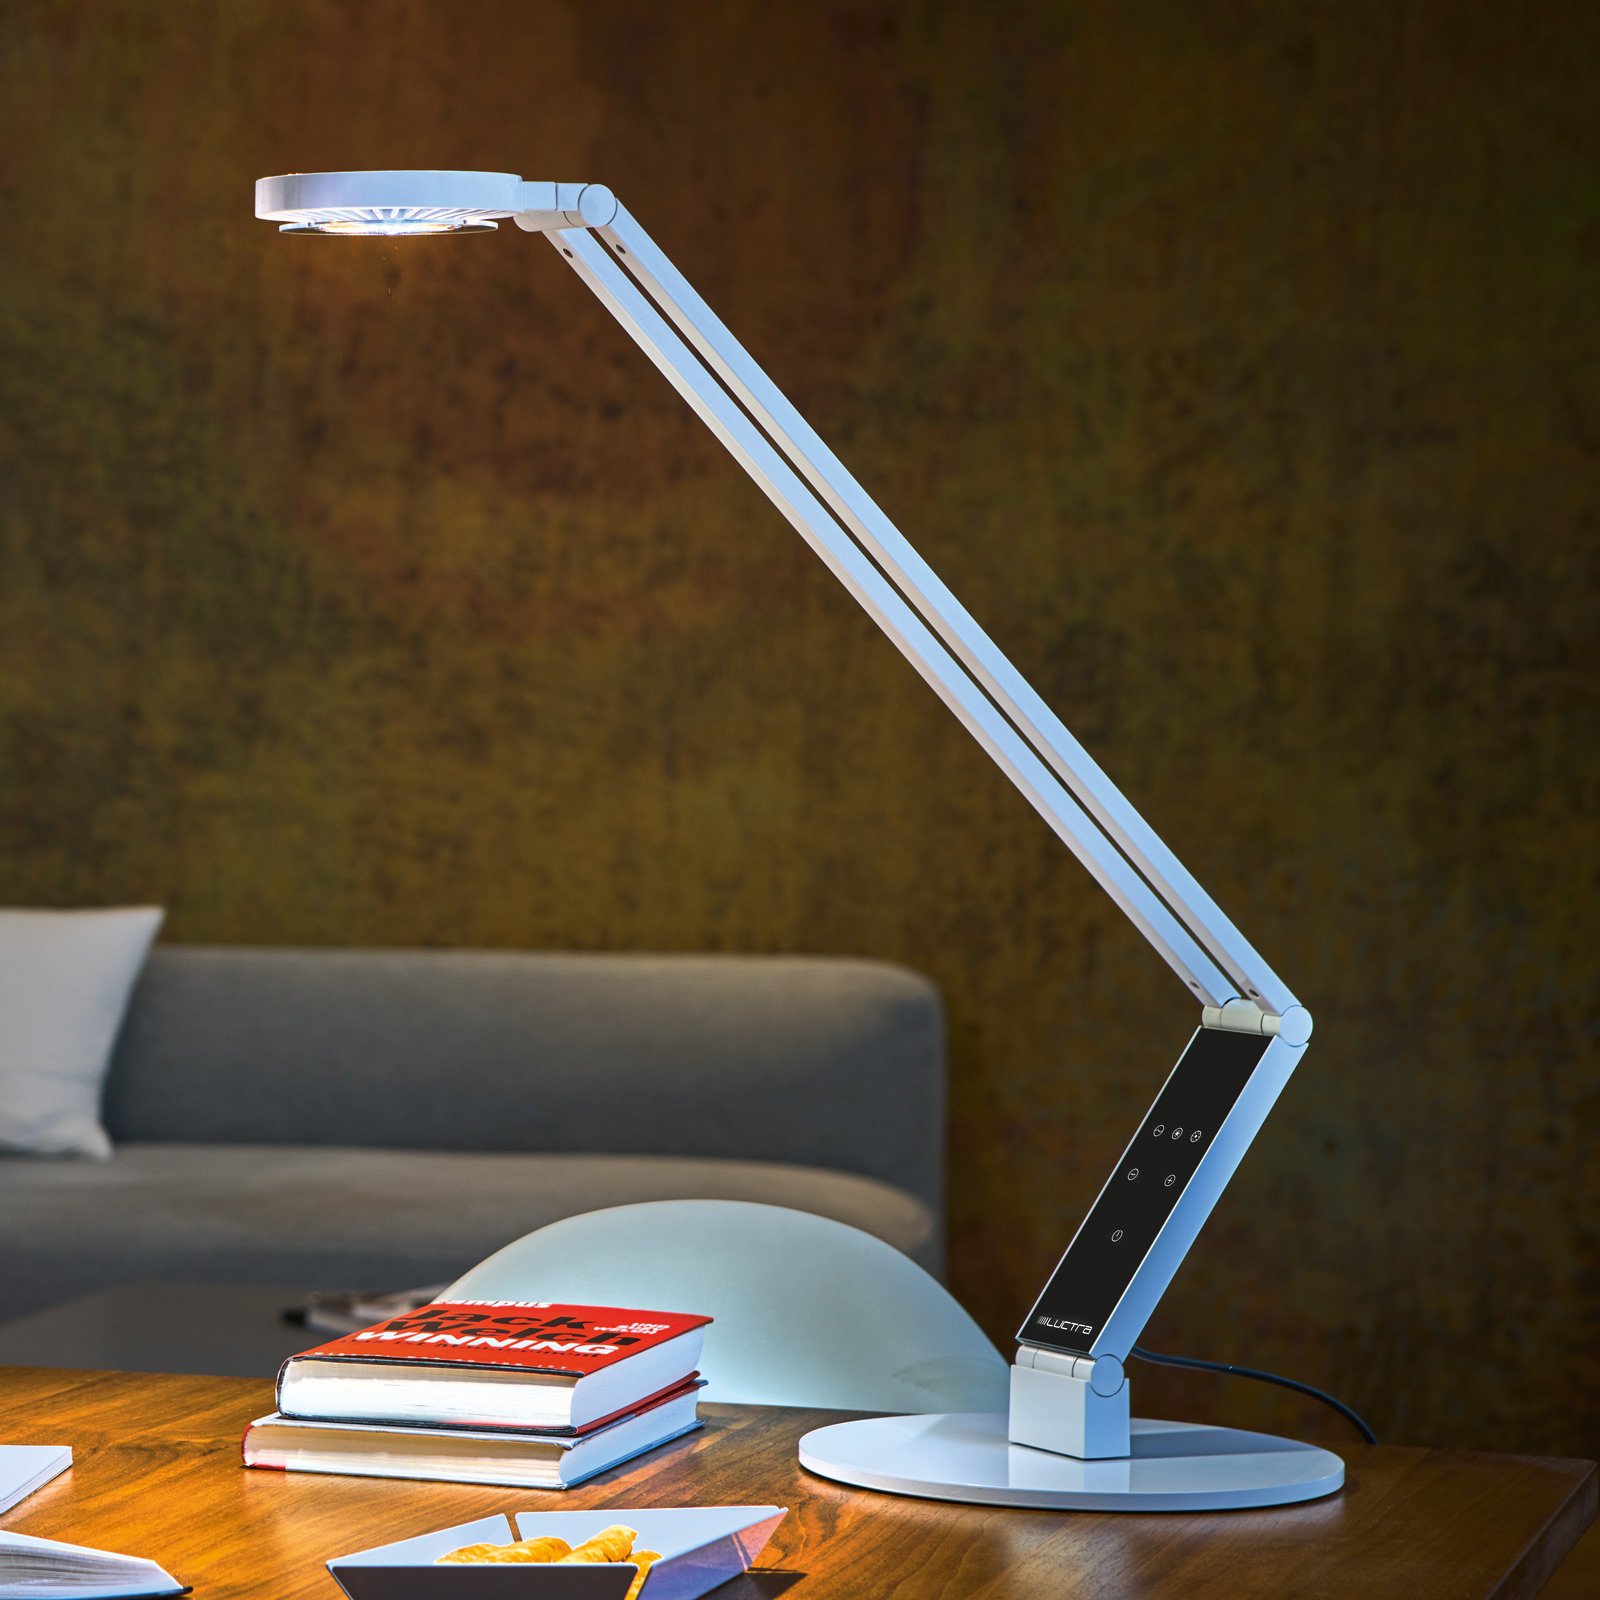 Luctra Table Radial LED table lamp white base